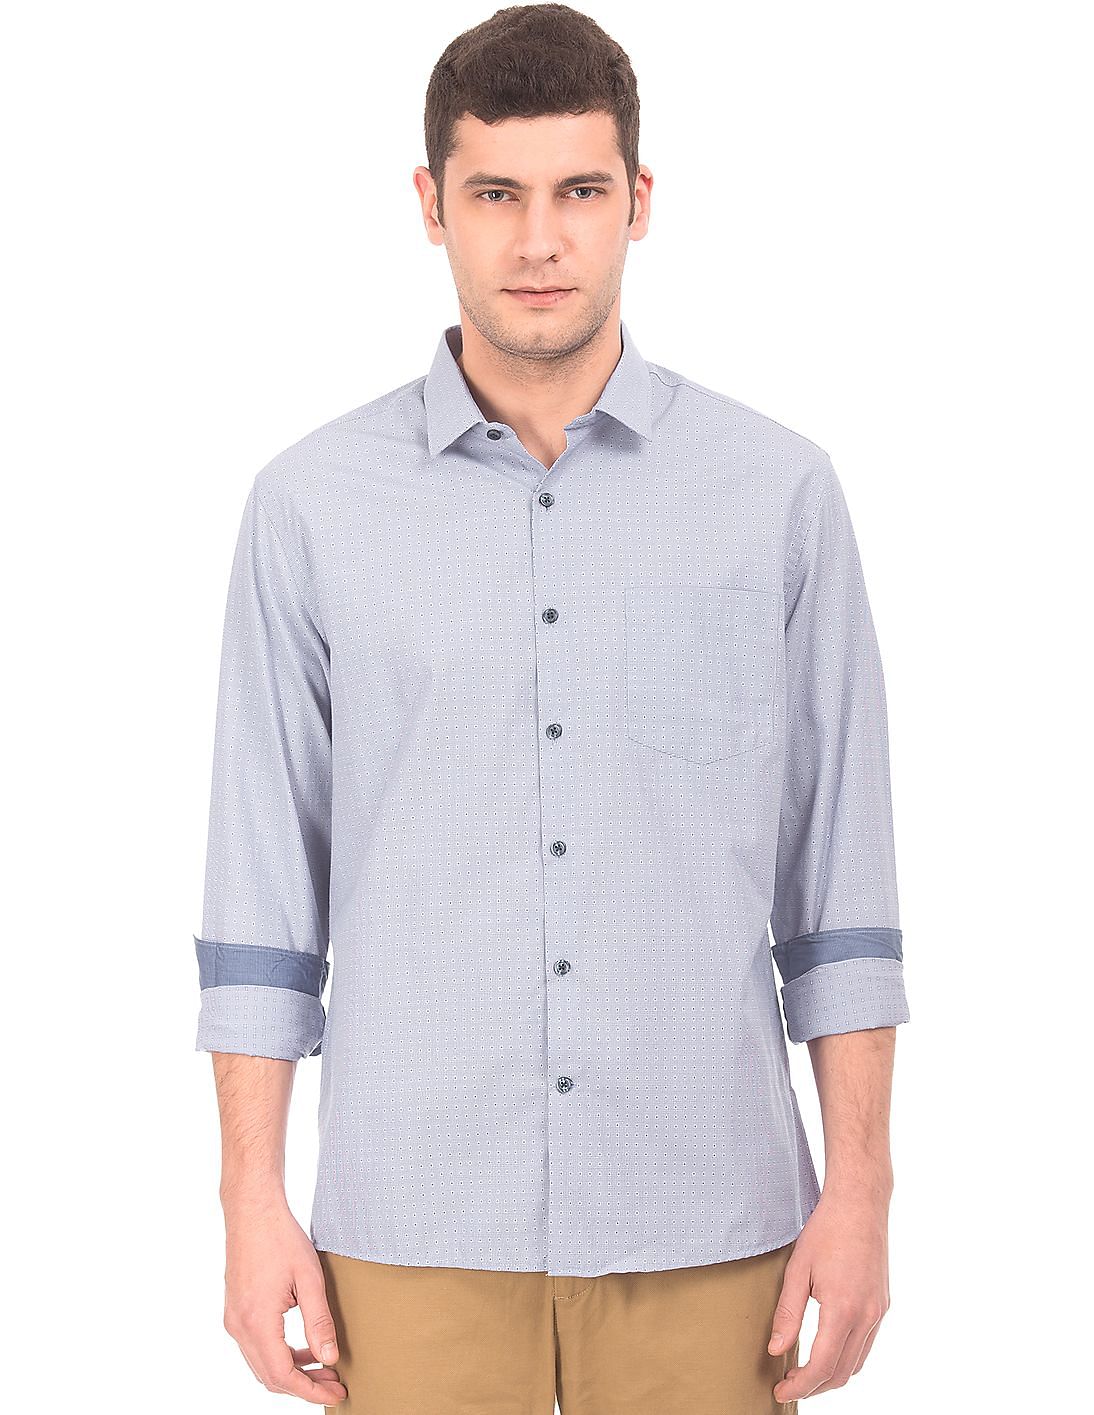 Buy Excalibur by Unlimited Patterned French Placket Shirt - NNNOW.com